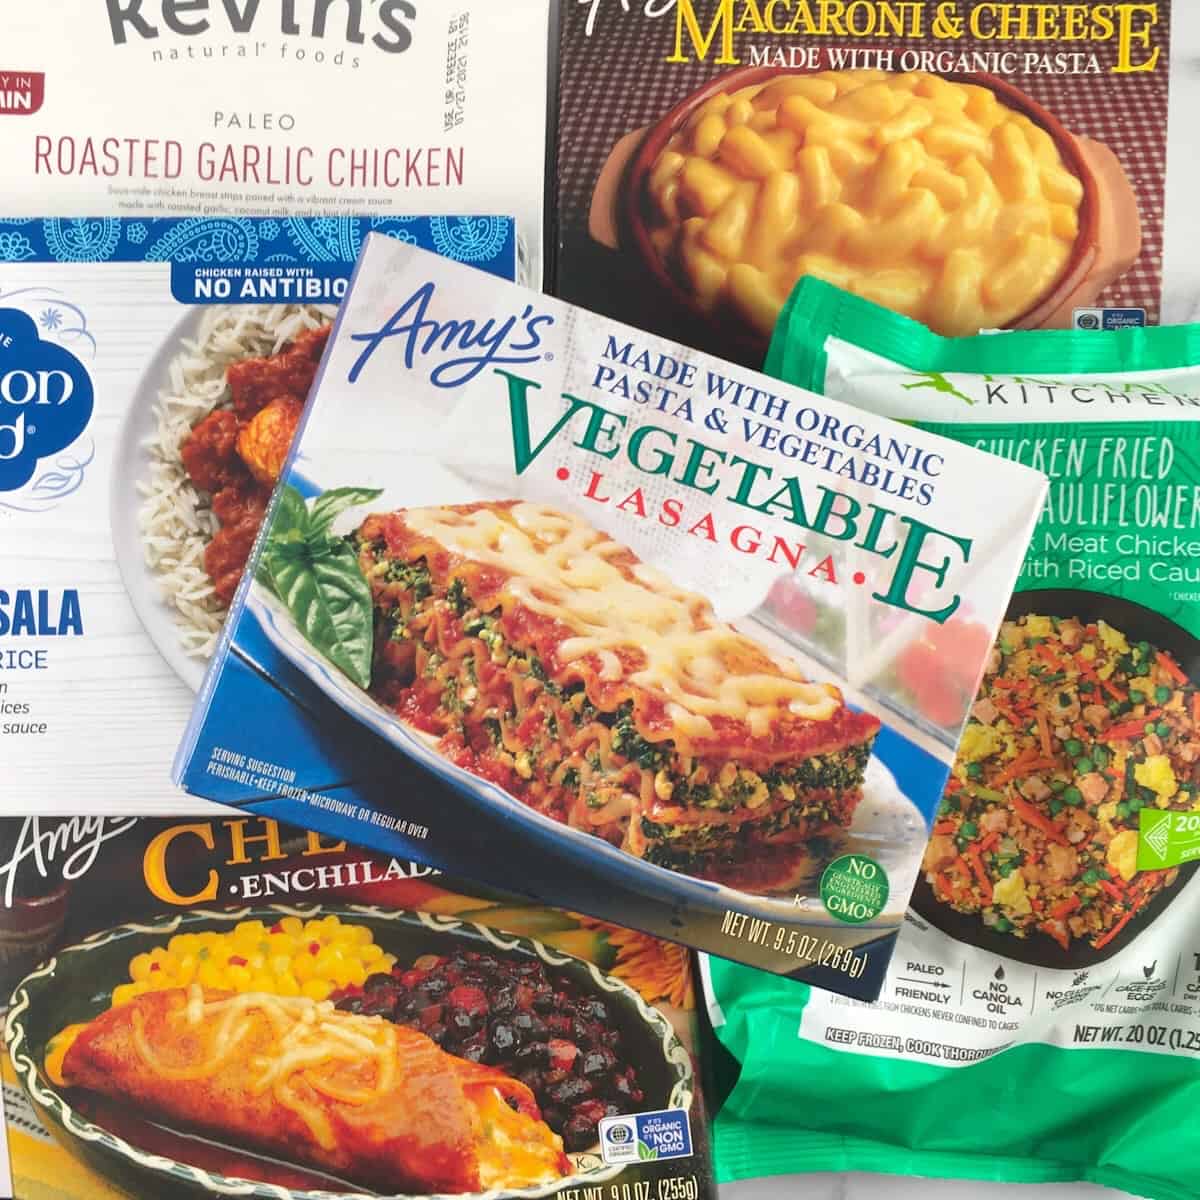 Why You Should Switch To Plastic-Free Microwave Food Covers - I'm